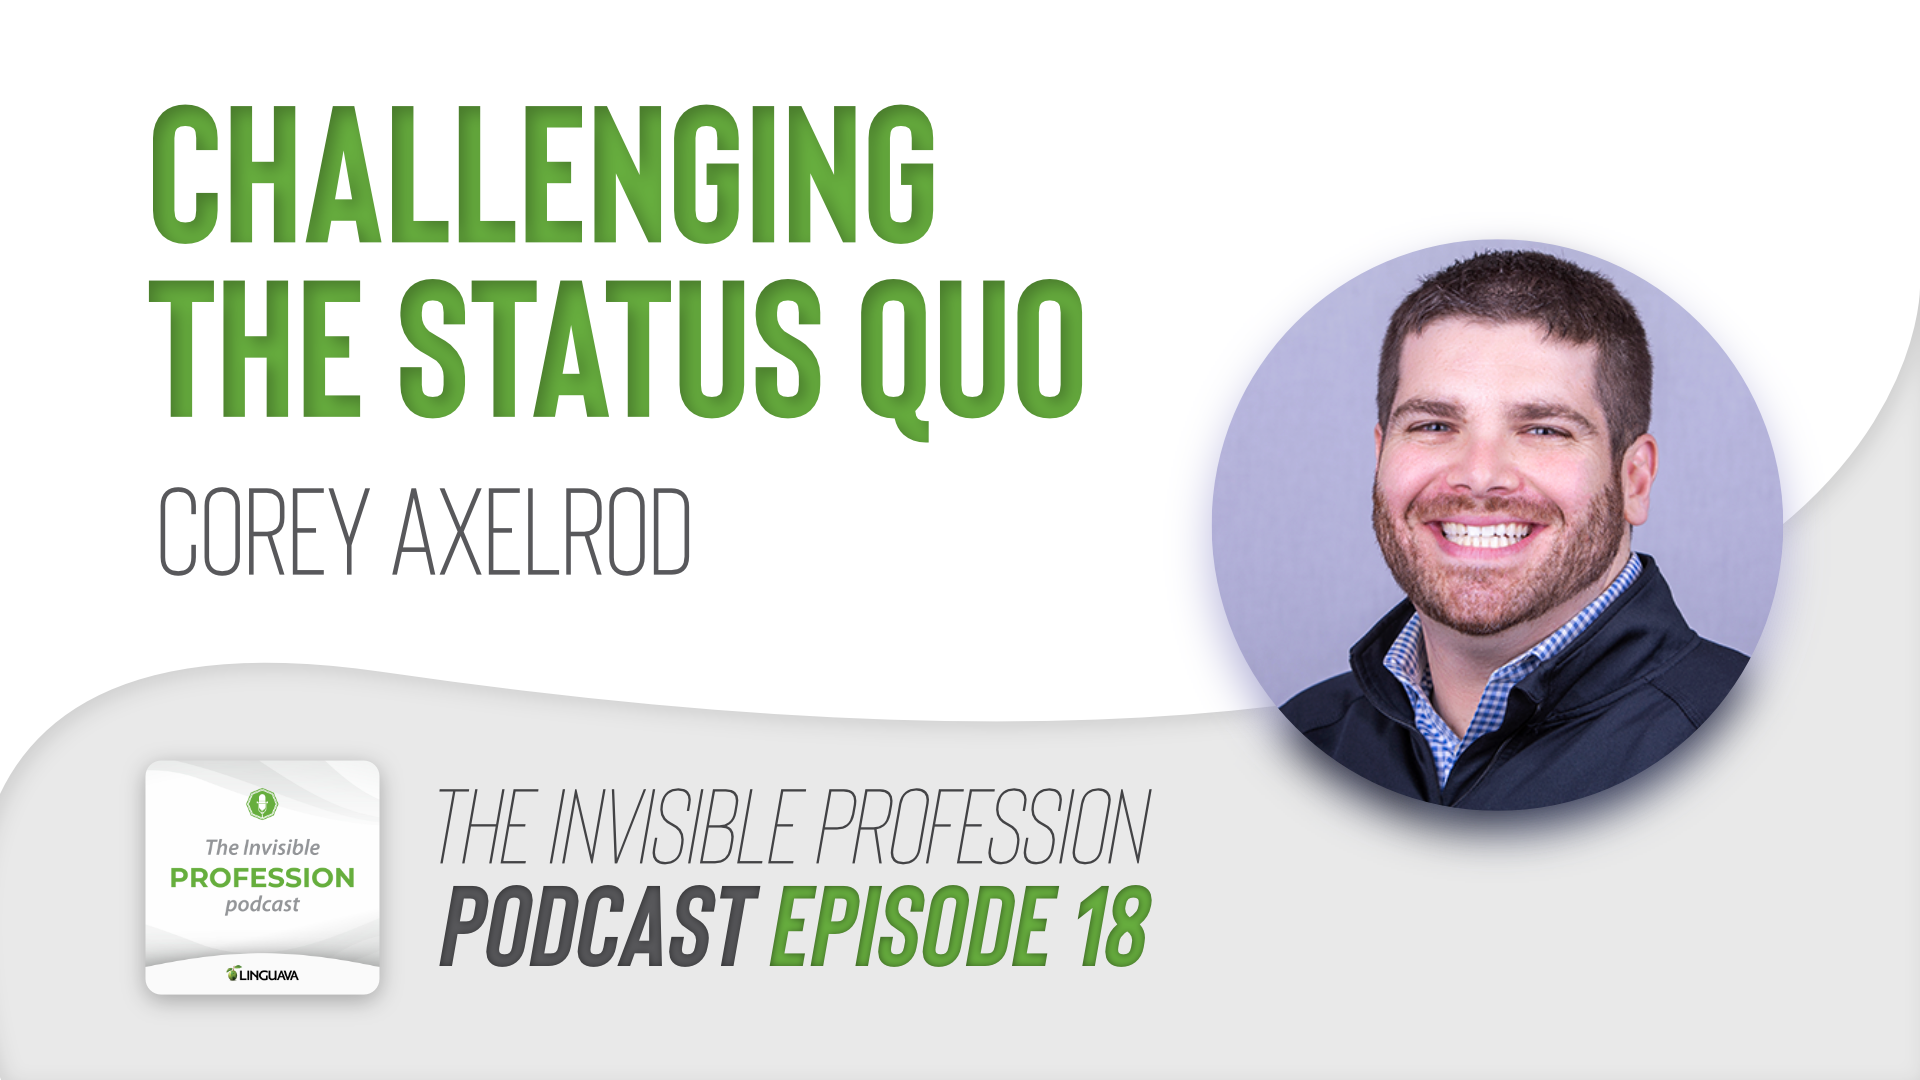 podcast cover with challenging the status quo text and photo of corey axelrod